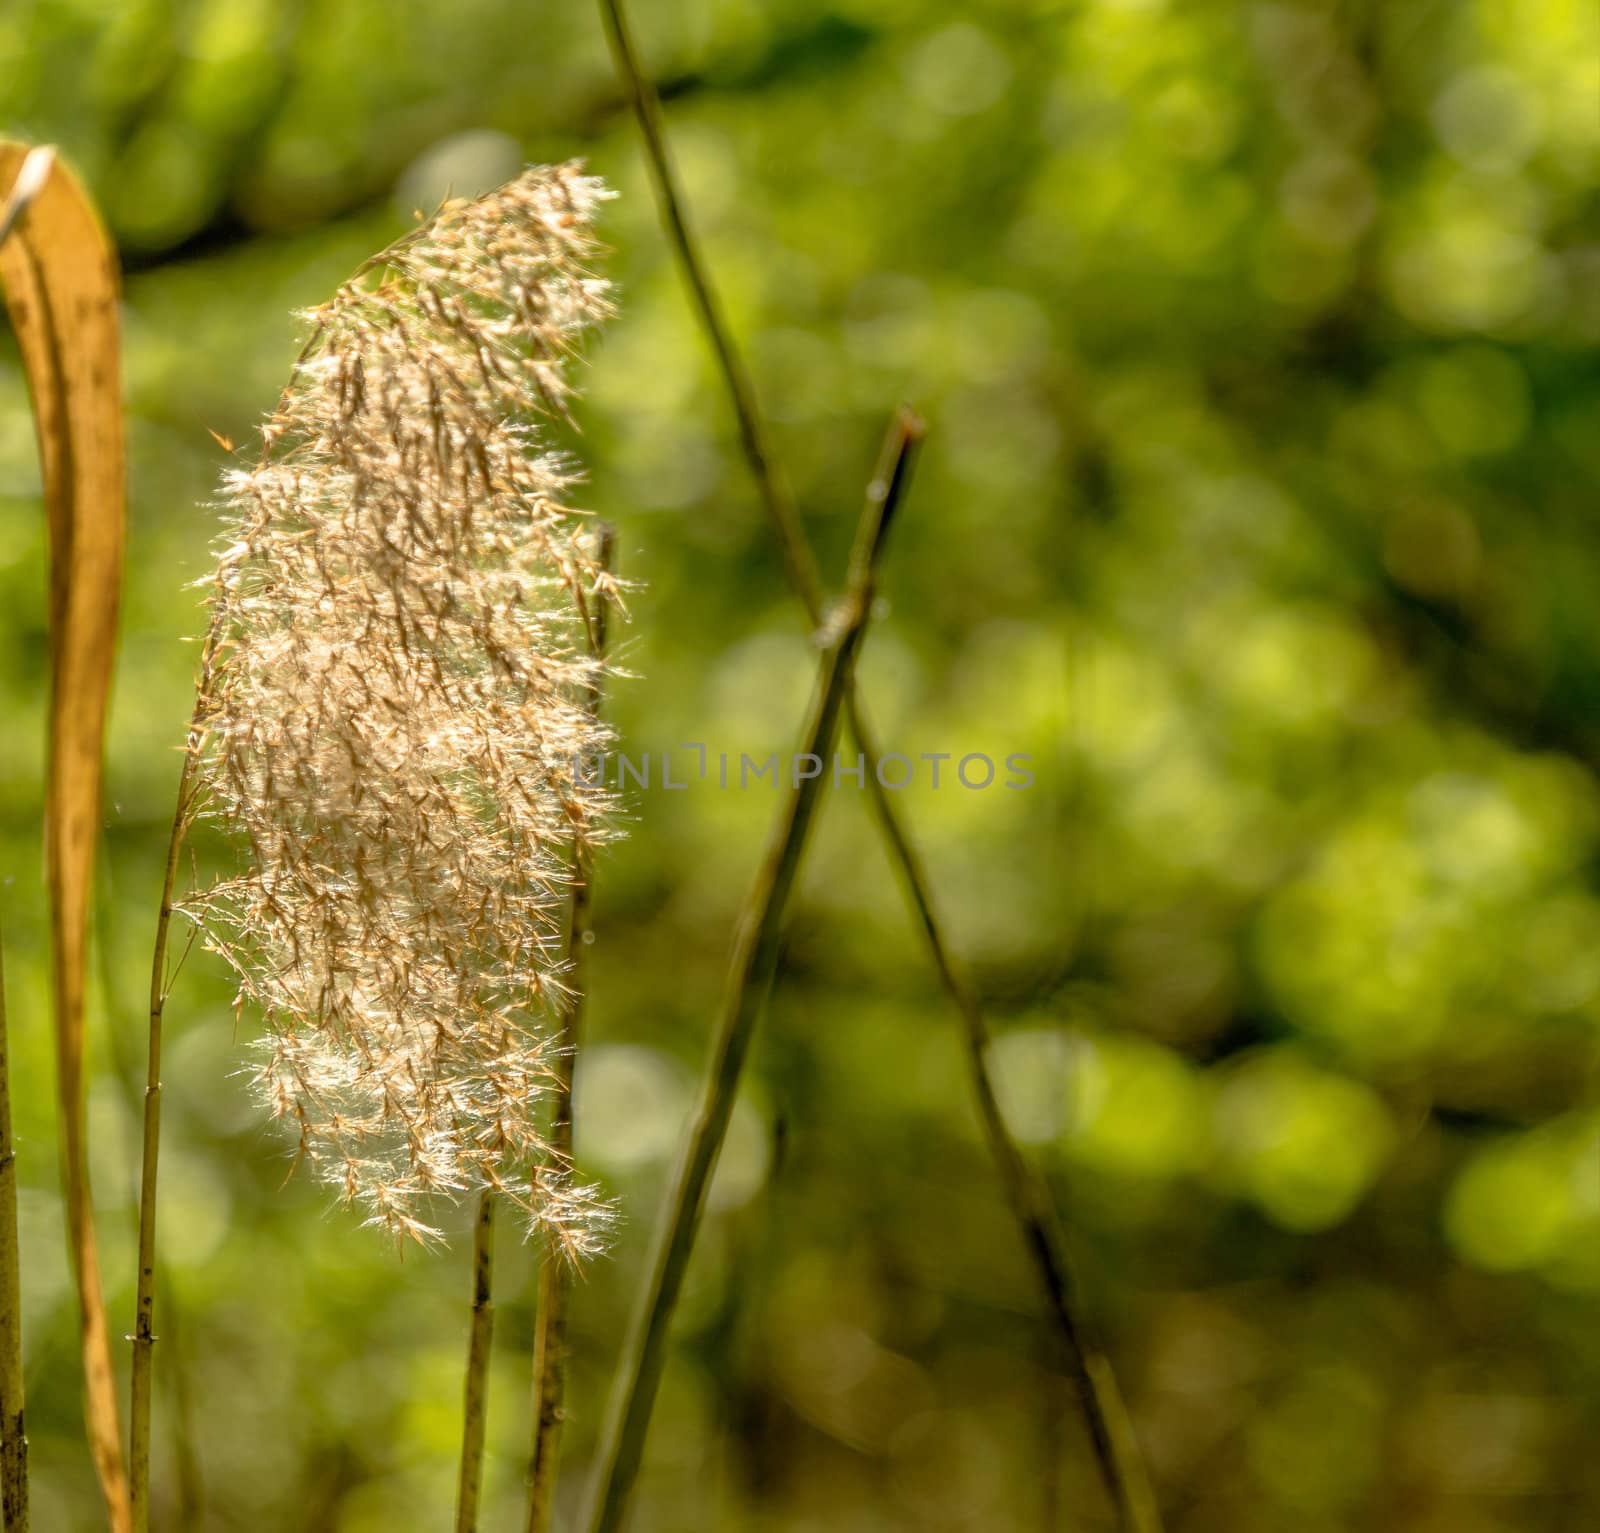 Blooming reed (Phragmites) in bright sunshine against an intentionally blurred green background by geogif